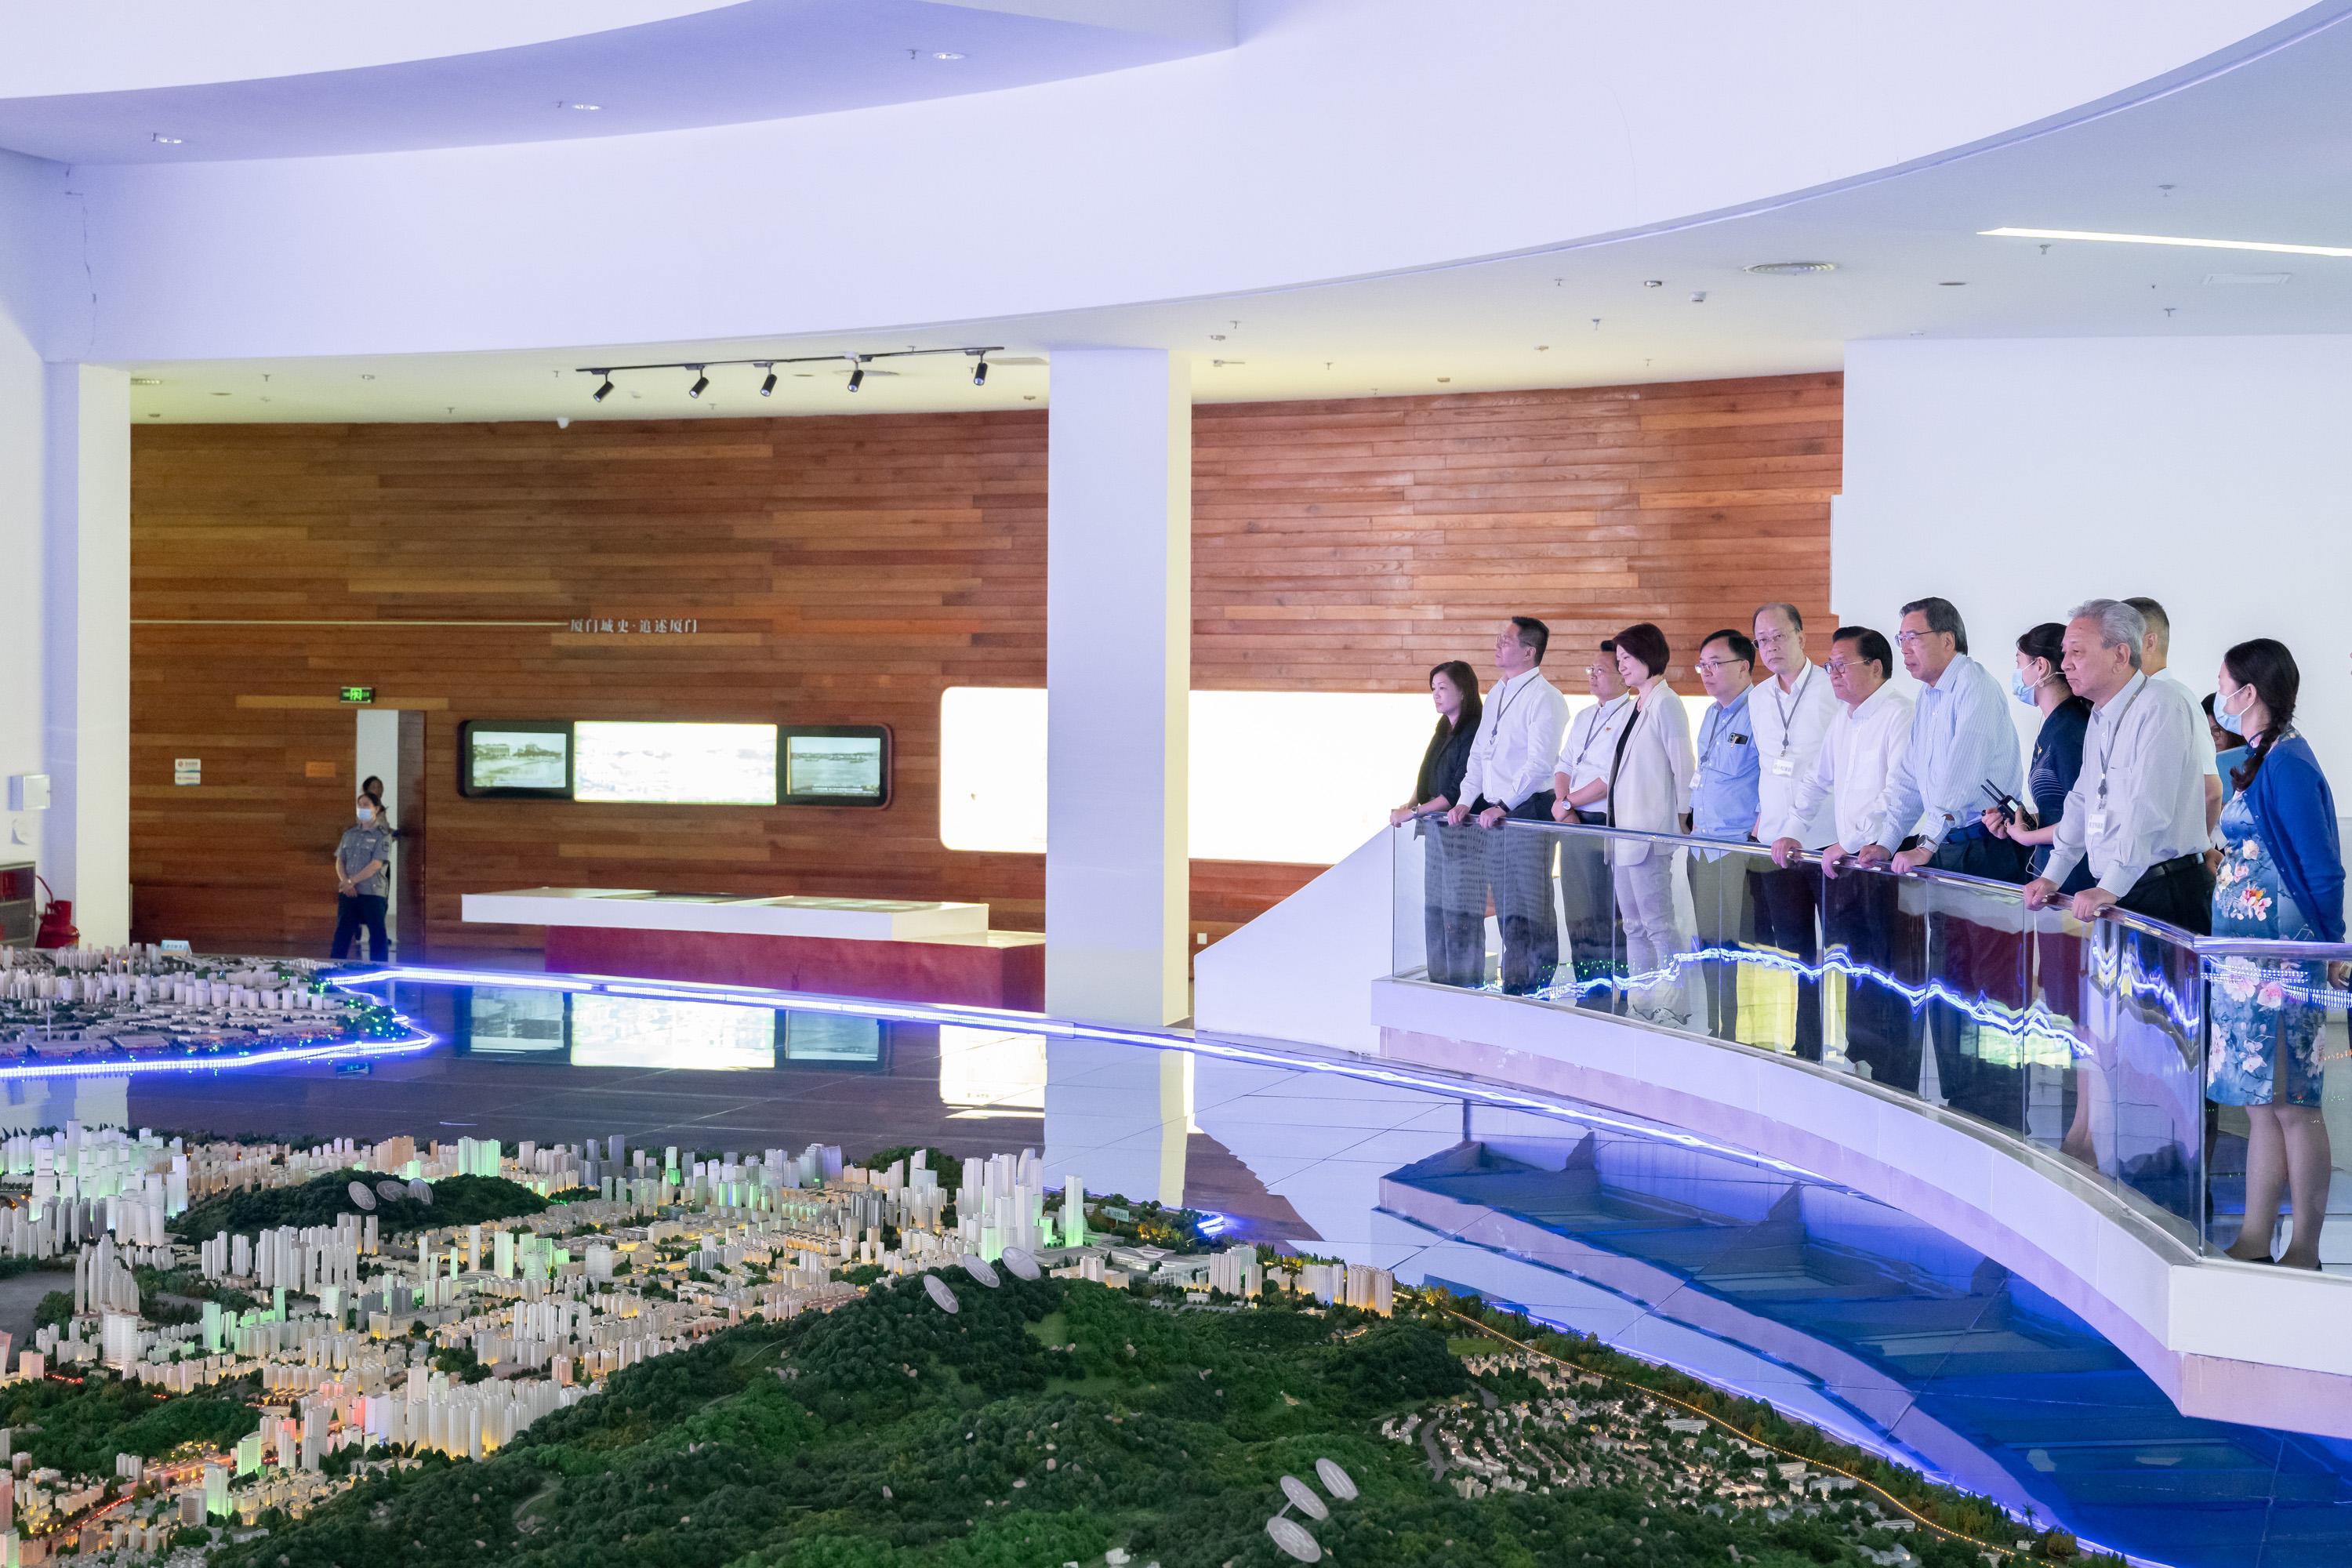 The delegation of the Legislative Council (LegCo), led by the President of LegCo, Mr Andrew Leung (fourth right), visits Xiamen. Photo shows the LegCo delegation visits Xiamen Planning Exhibition Hall to understand the history and changes of Xiamen.
